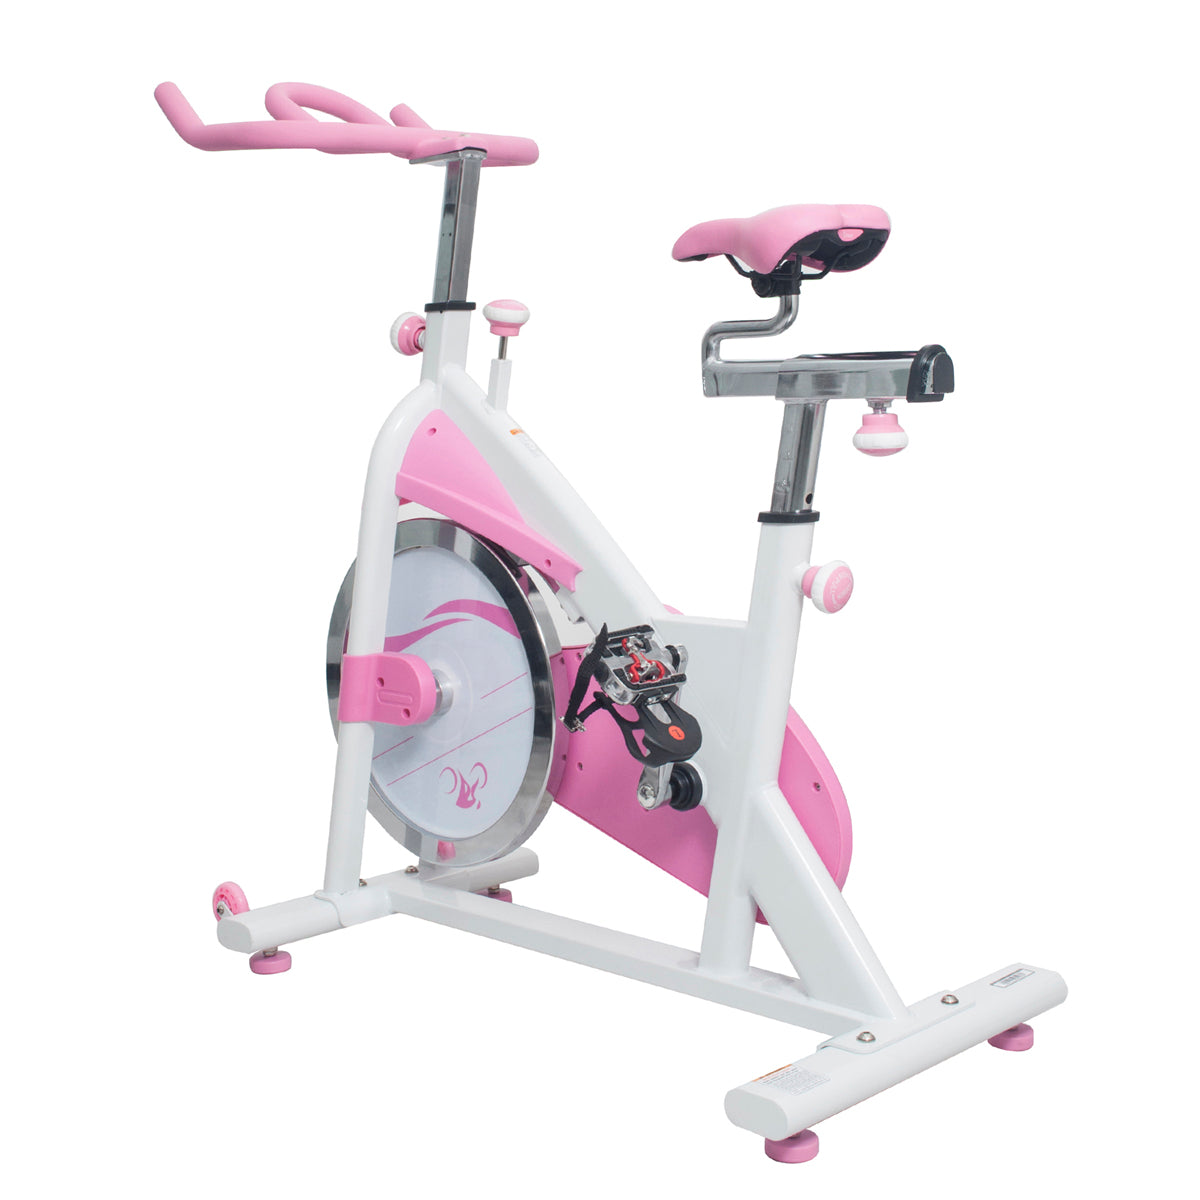 Sunny Health & Fitness Pink Chain Drive Indoor Cycling Exercise Stationary  Bike w/ Monitor for Home Workout, Sport Training P8100 